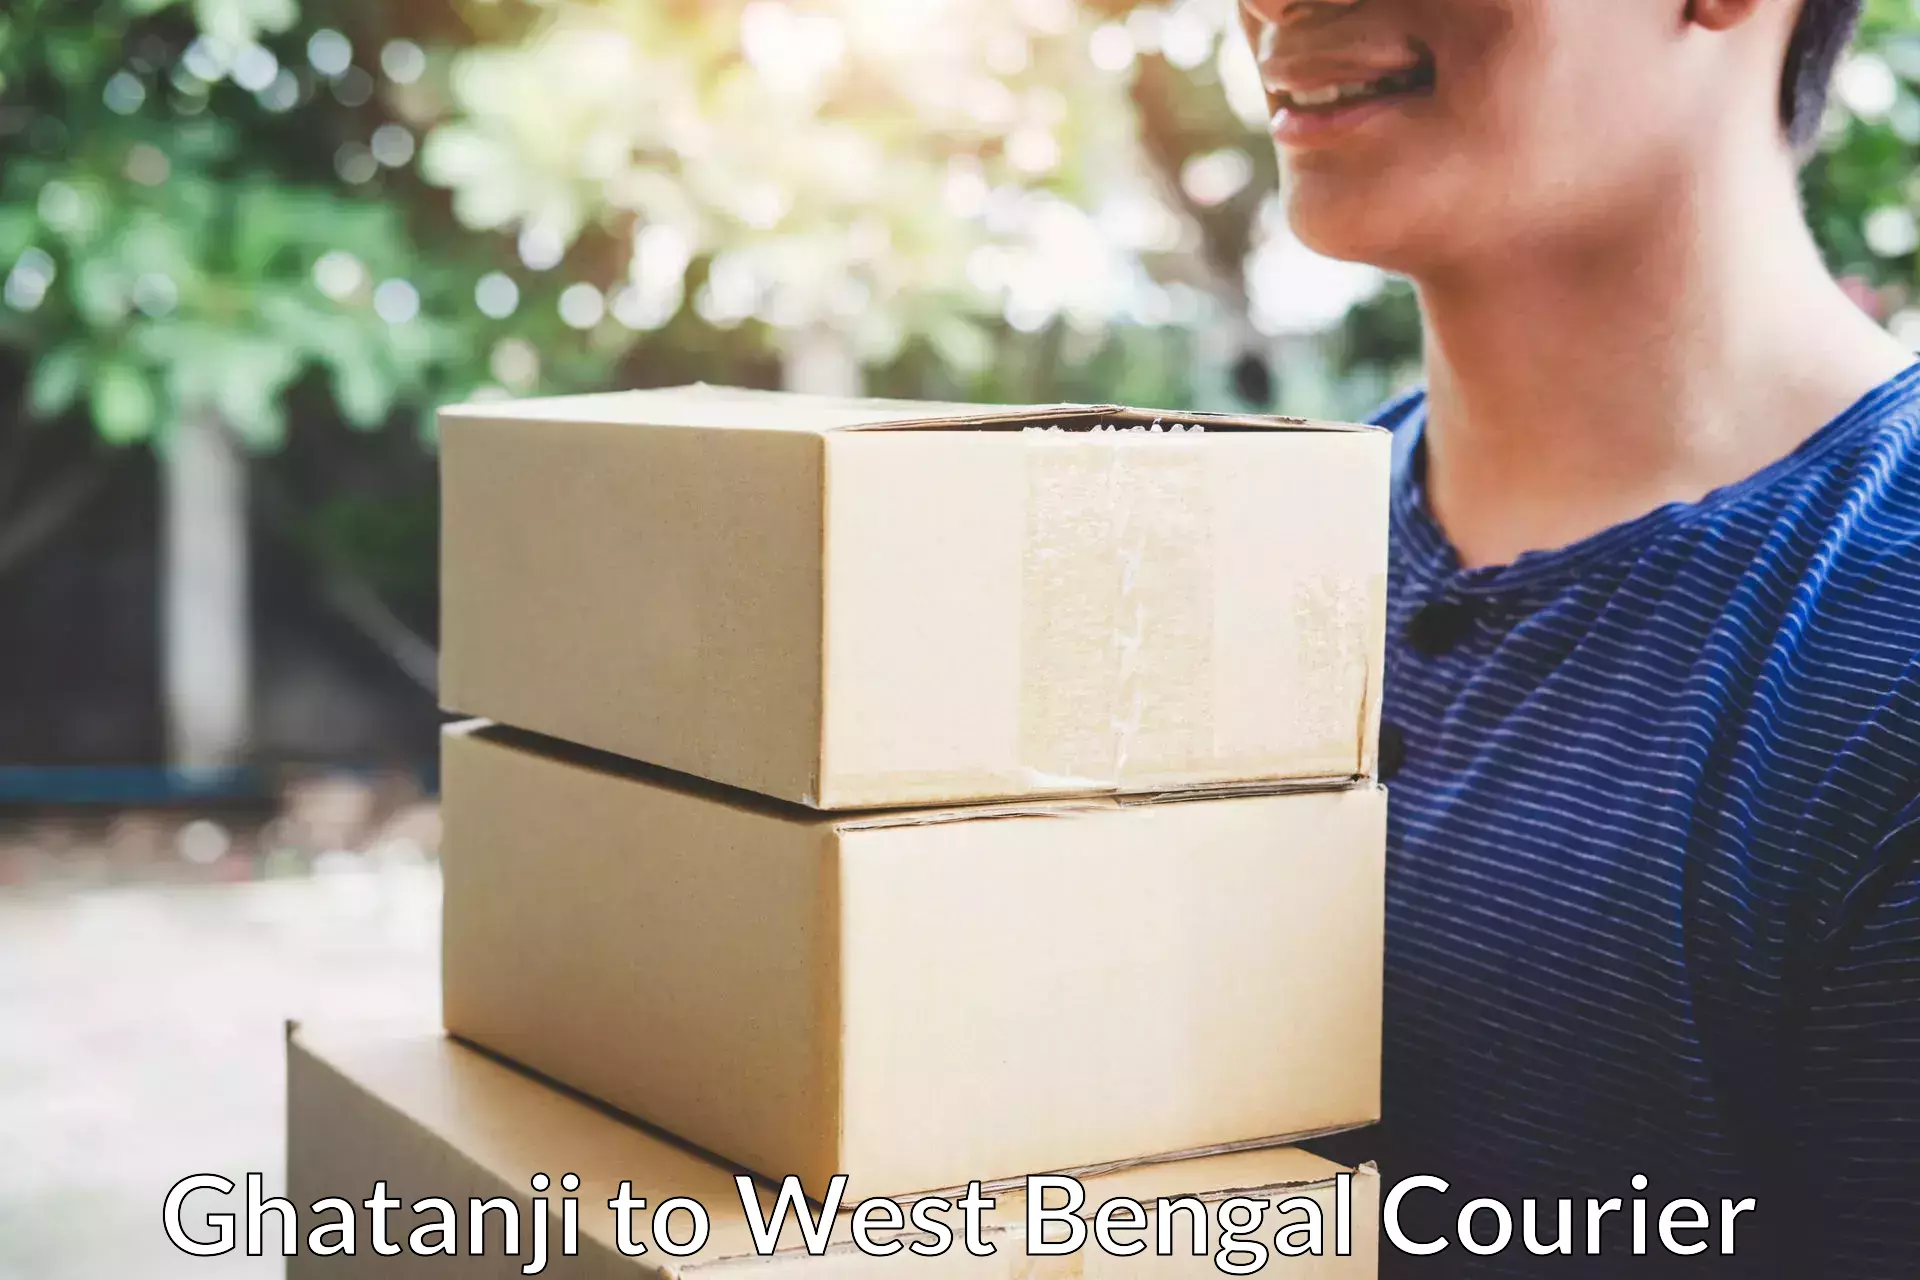 Trusted moving company Ghatanji to West Bengal